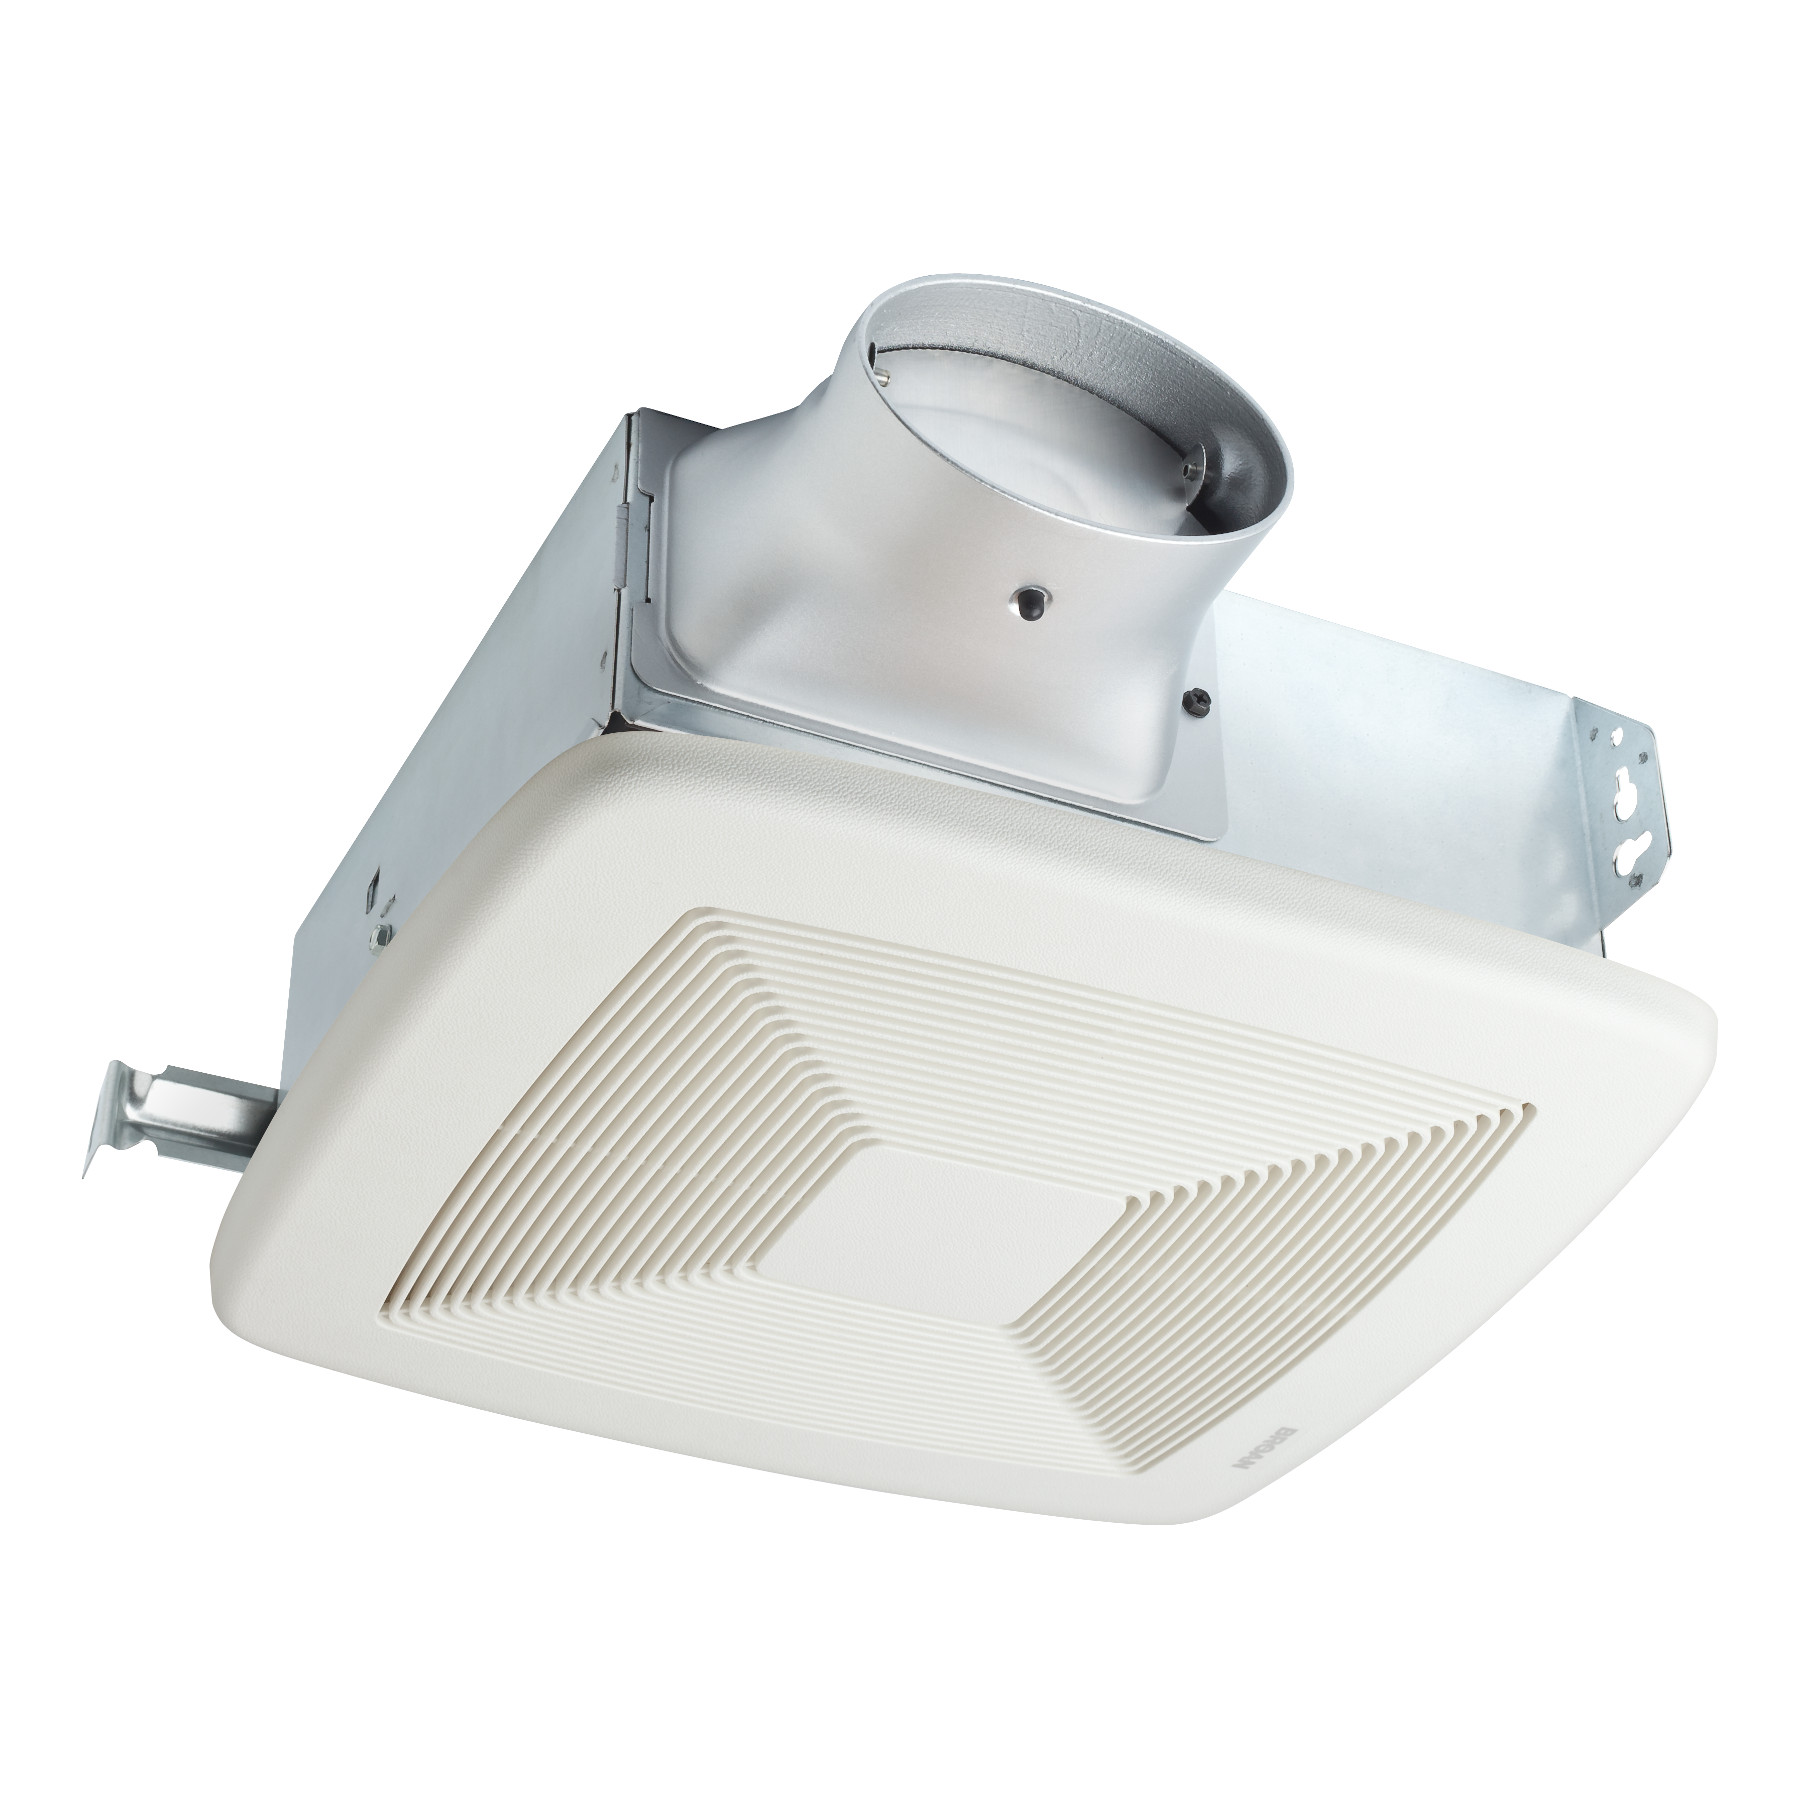 **DISCONTINUED** LoProfile 110 CFM Ceiling/Wall Exhaust Fan for Bathroom or Garage with 4 in. Oval Duct, ENERGY STAR*